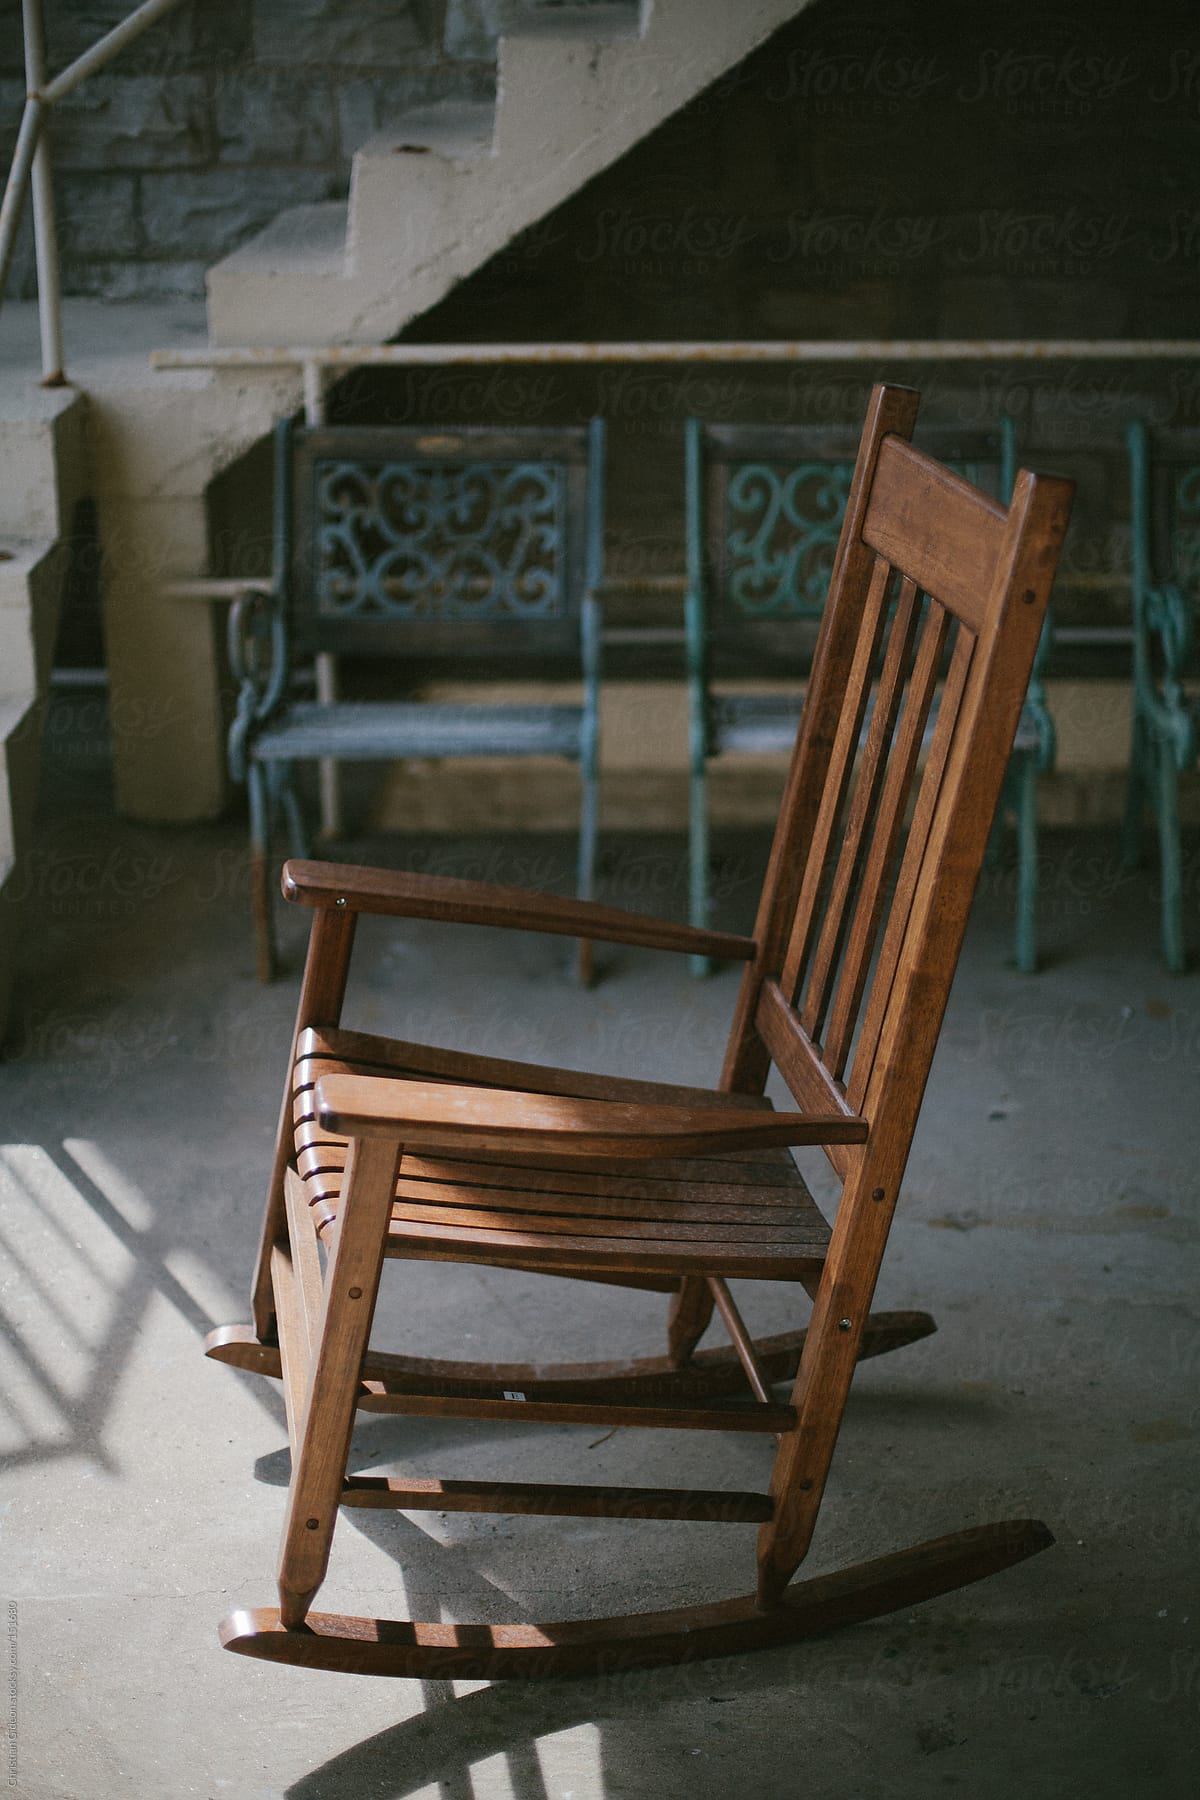 Lonesome Wooden Chair